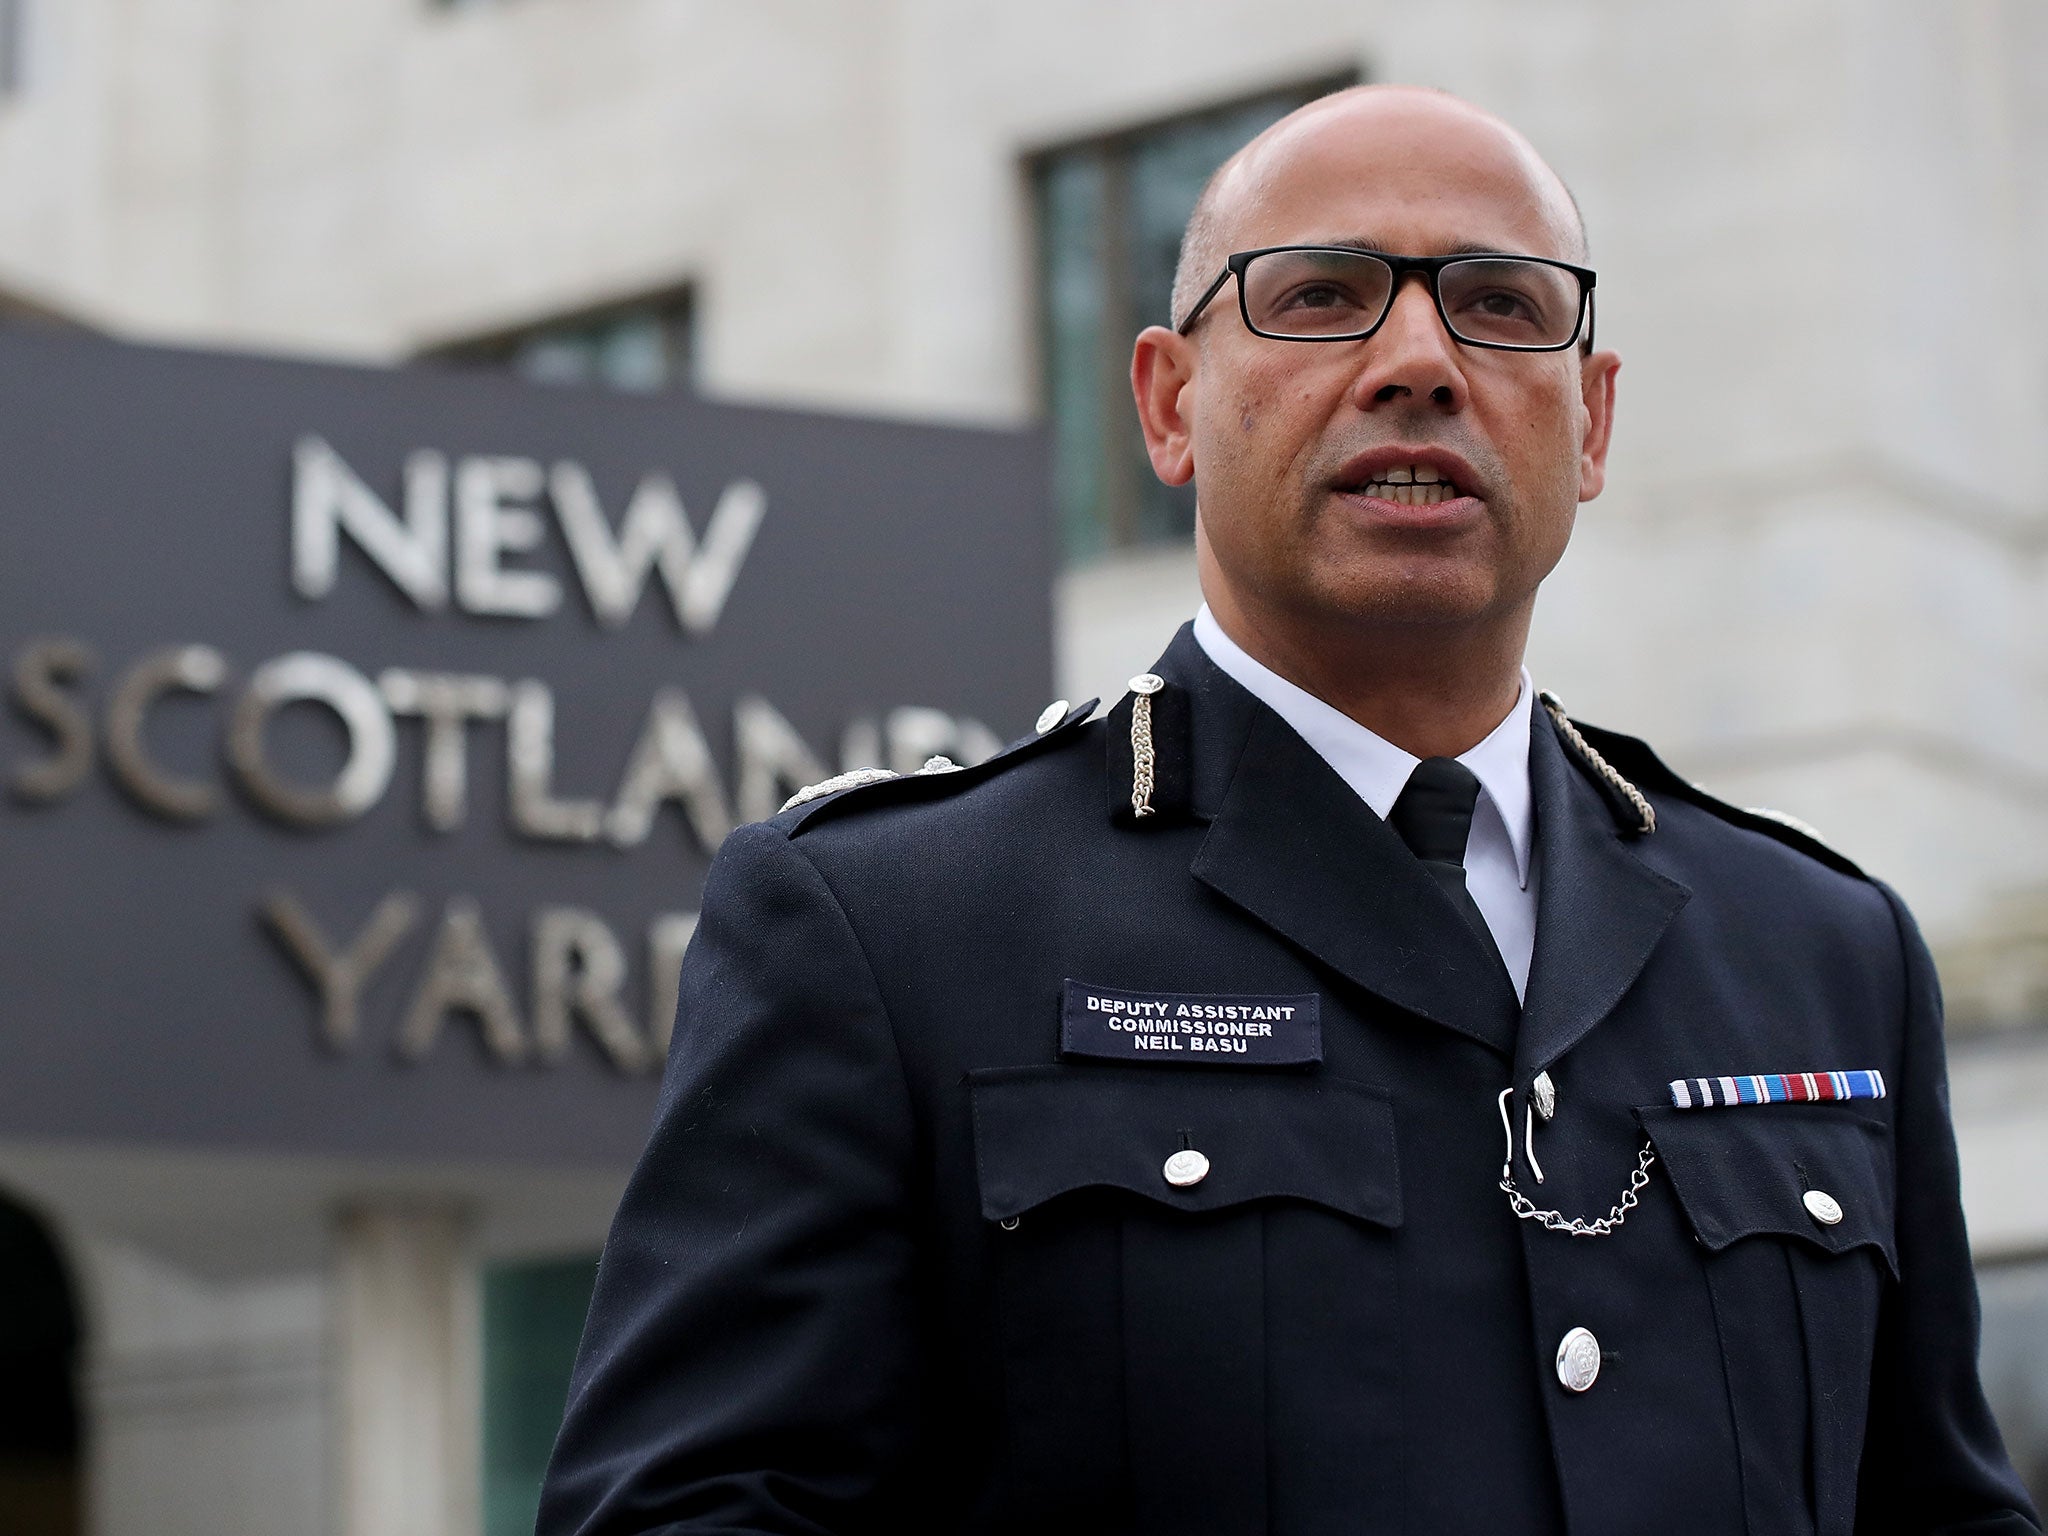 Assistant Commissioner Neil Basu called on the government to shore up resources across policing so it can deal with the rising threat 